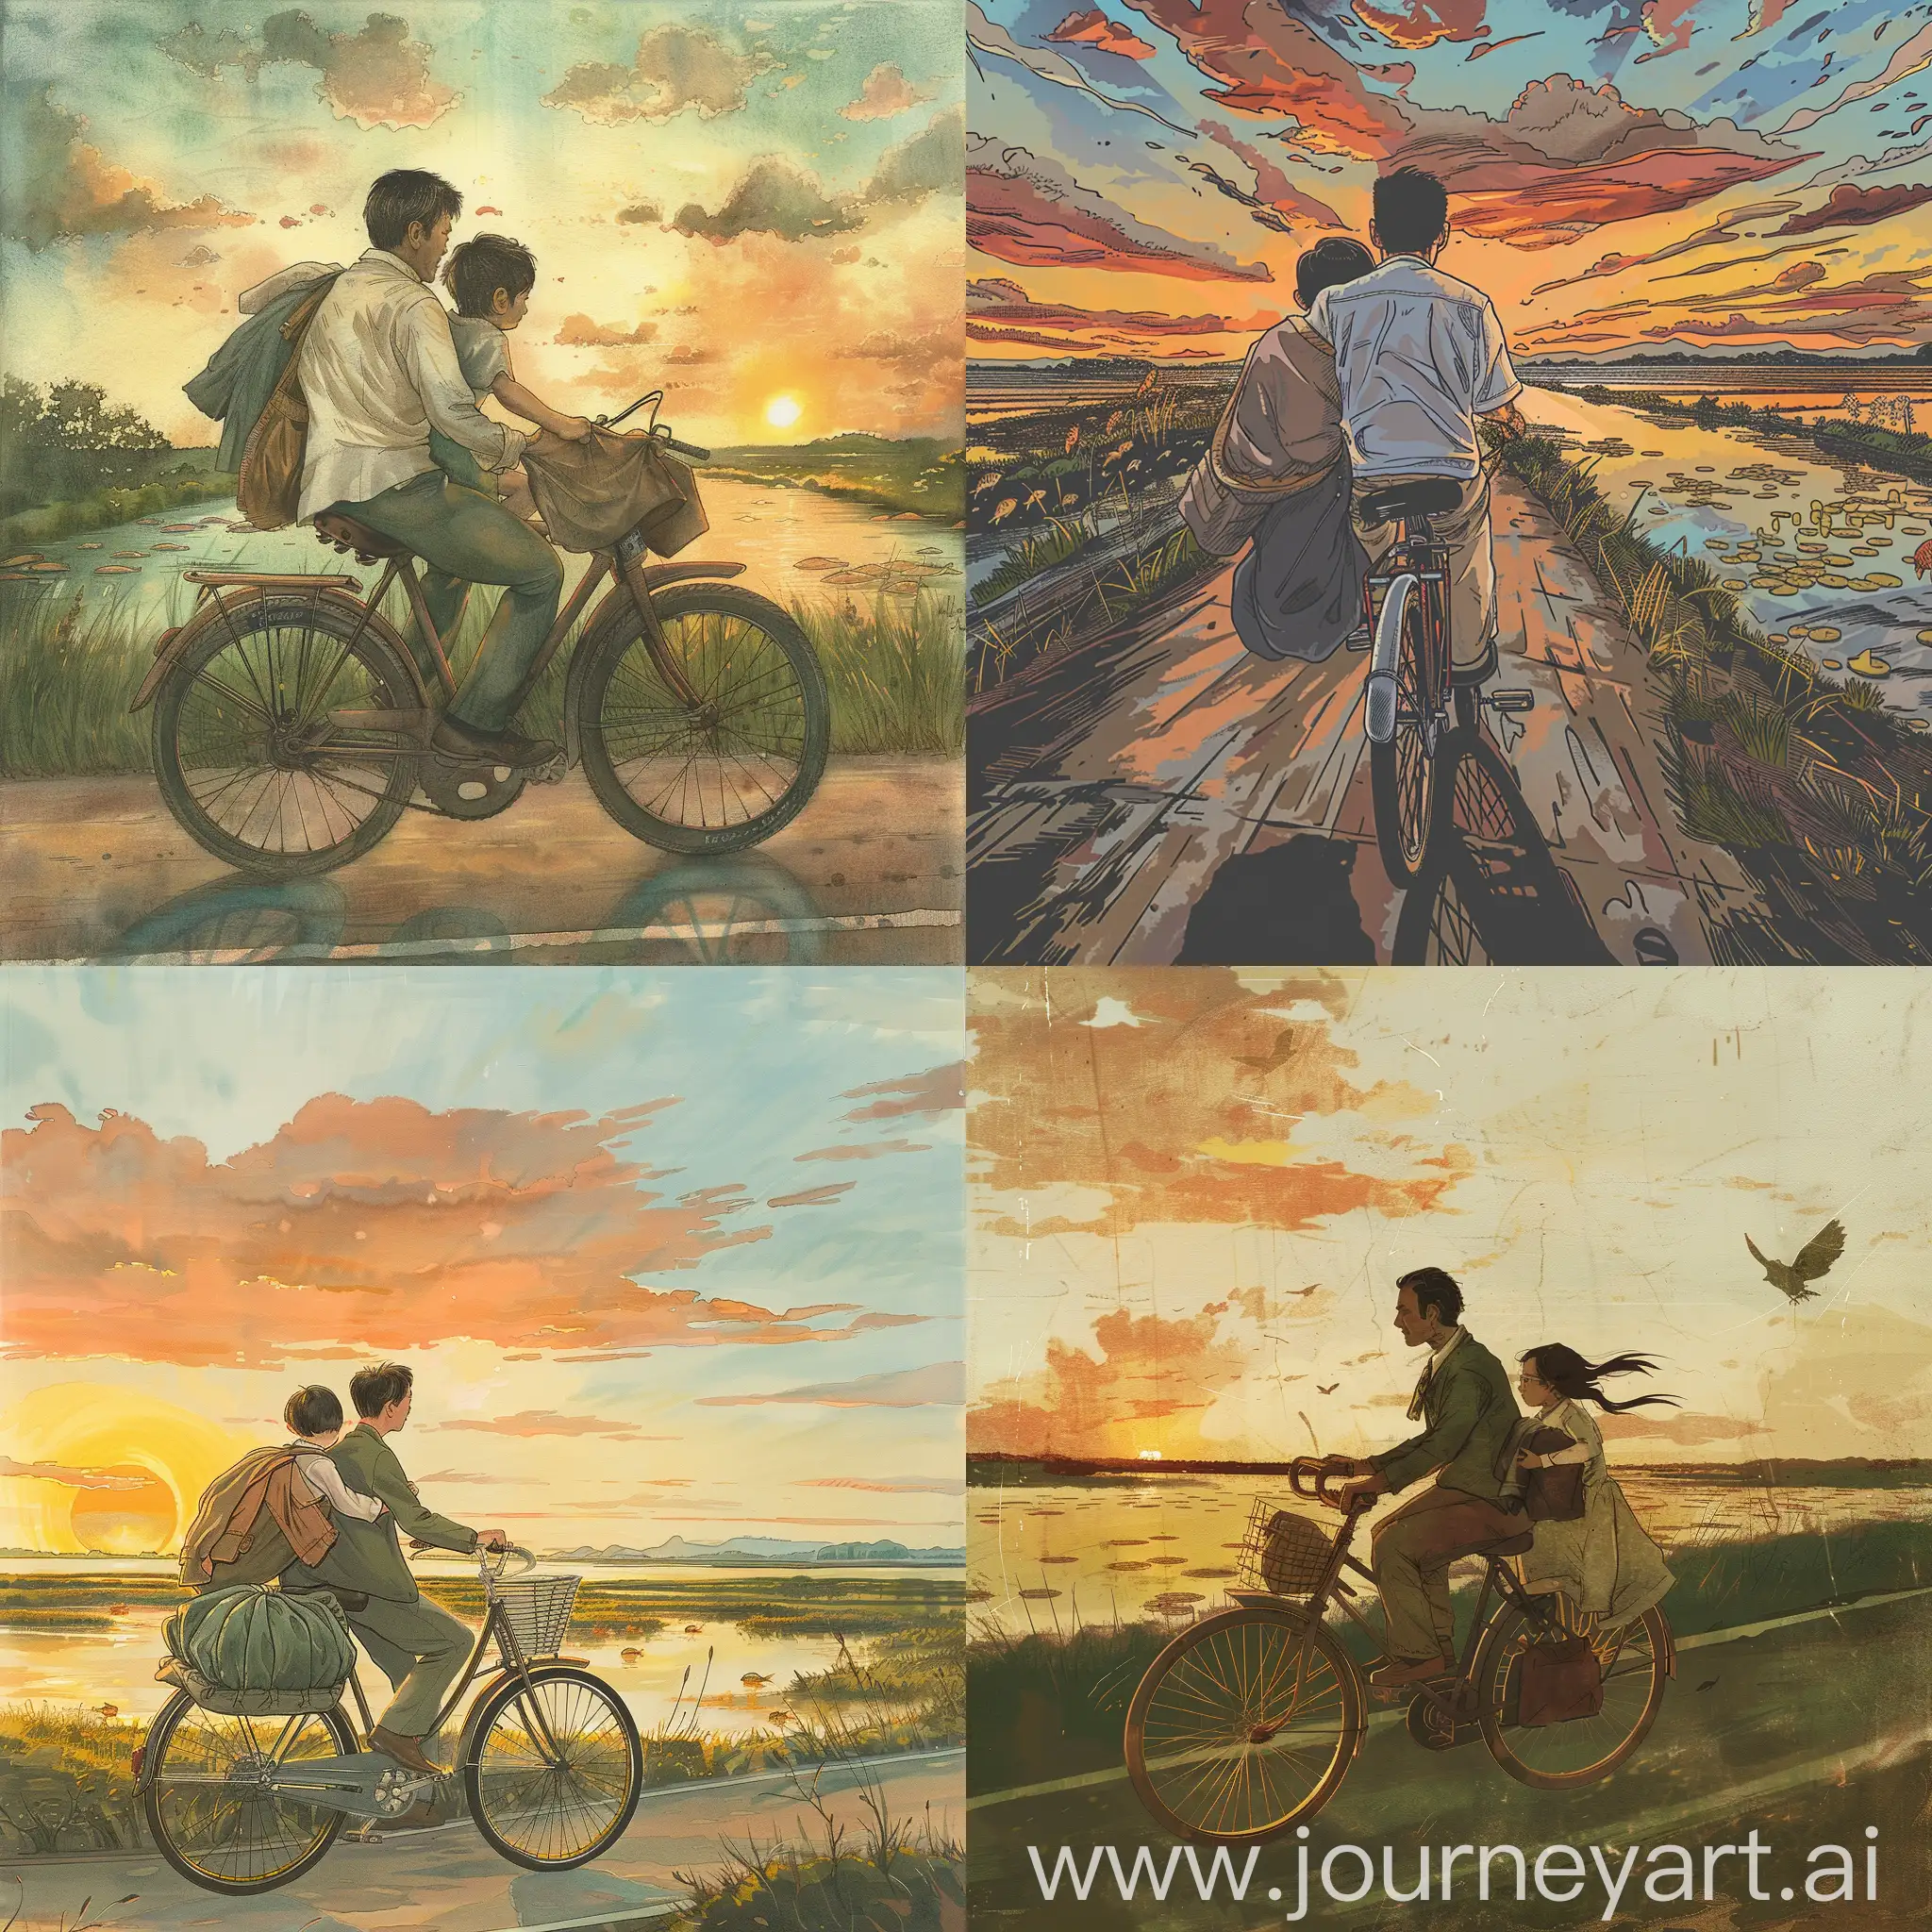 Father-and-Child-Riding-Vintage-Bicycle-by-Sunset-Fish-Ponds